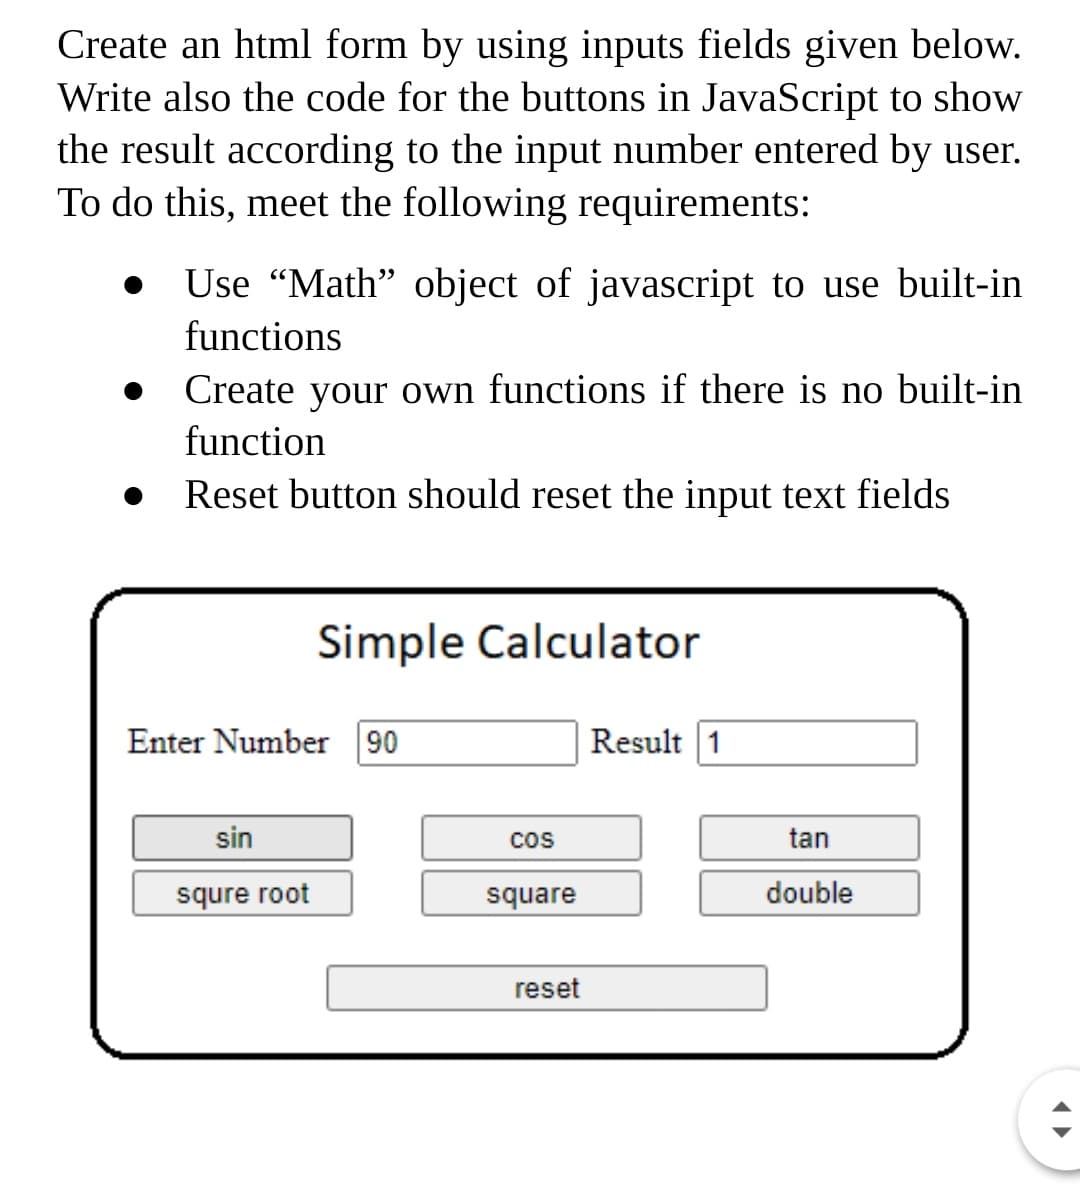 Create an html form by using inputs fields given below.
Write also the code for the buttons in JavaScript to show
the result according to the input number entered by user.
To do this, meet the following requirements:
Use "Math" object of javascript to use built-in
functions
Create your own functions if there is no built-in
function
Reset button should reset the input text fields
Simple Calculator
Enter Number 90
Result 1
sin
cos
tan
squre root
square
double
reset
